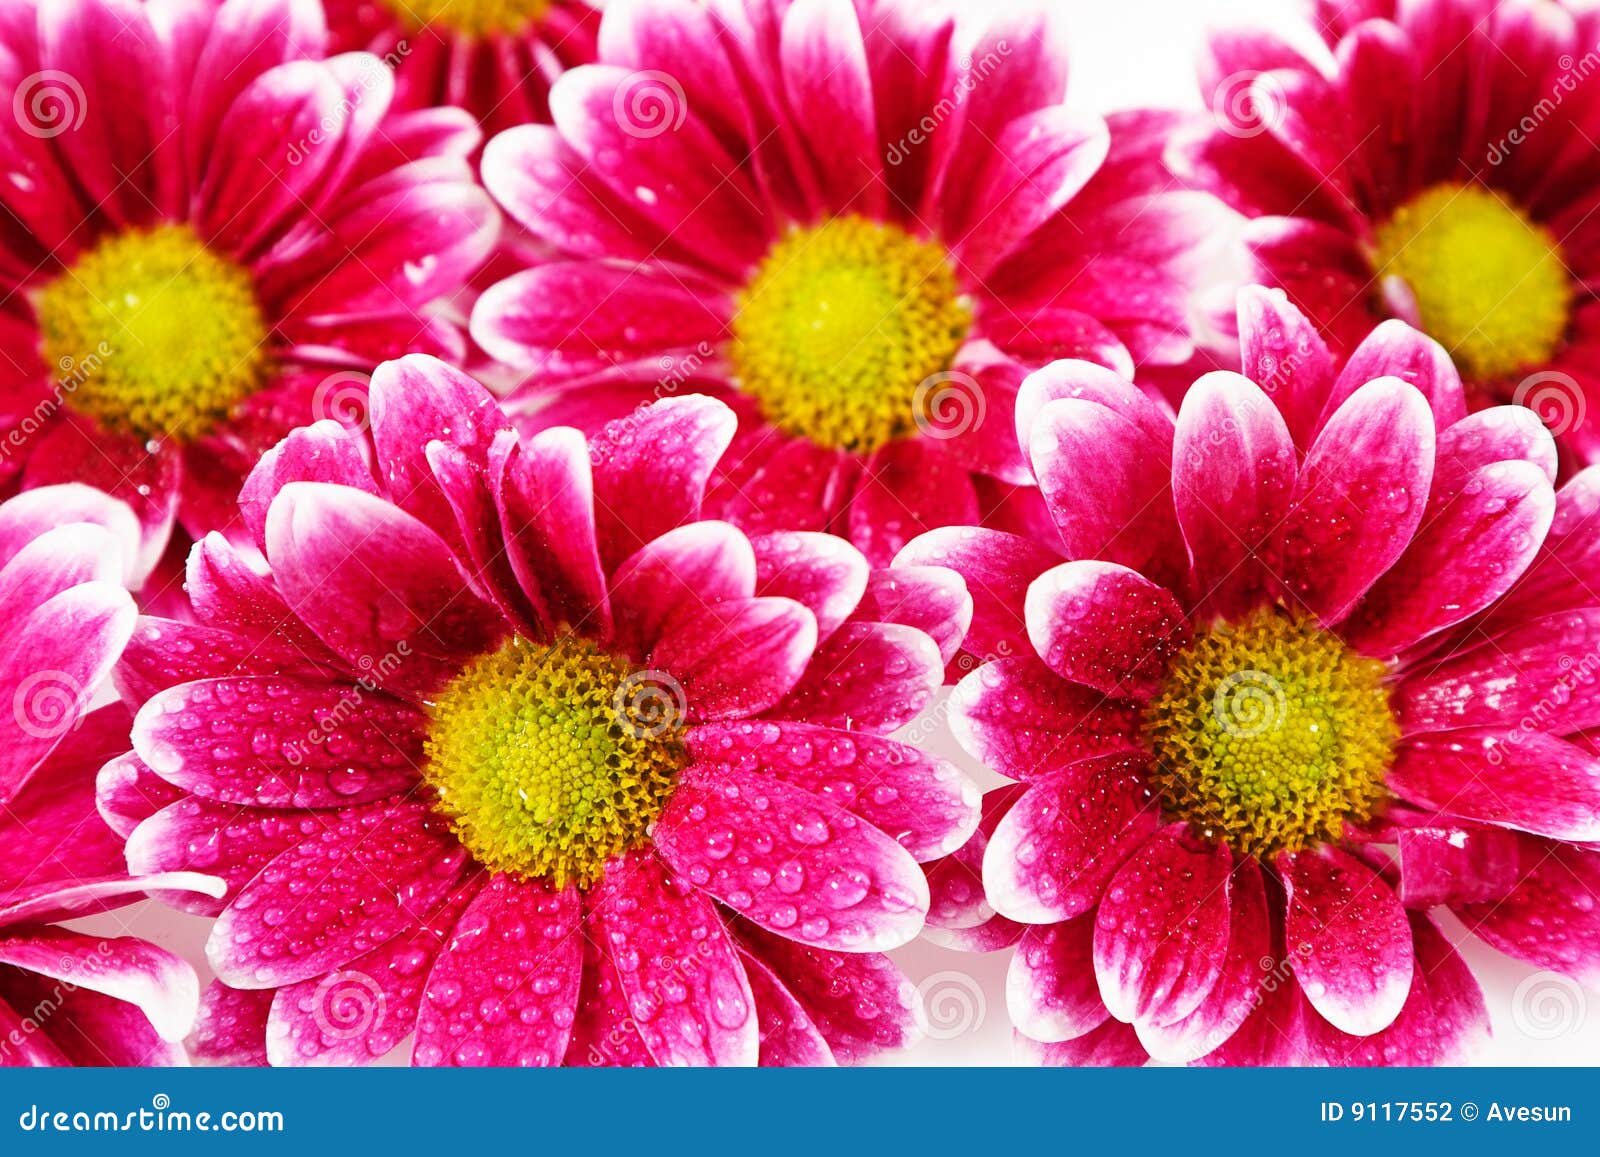 2656600 Pink Flower Stock Photos Pictures  RoyaltyFree Images   iStock  Pink flower background Pink flower white background Pink flower  petals